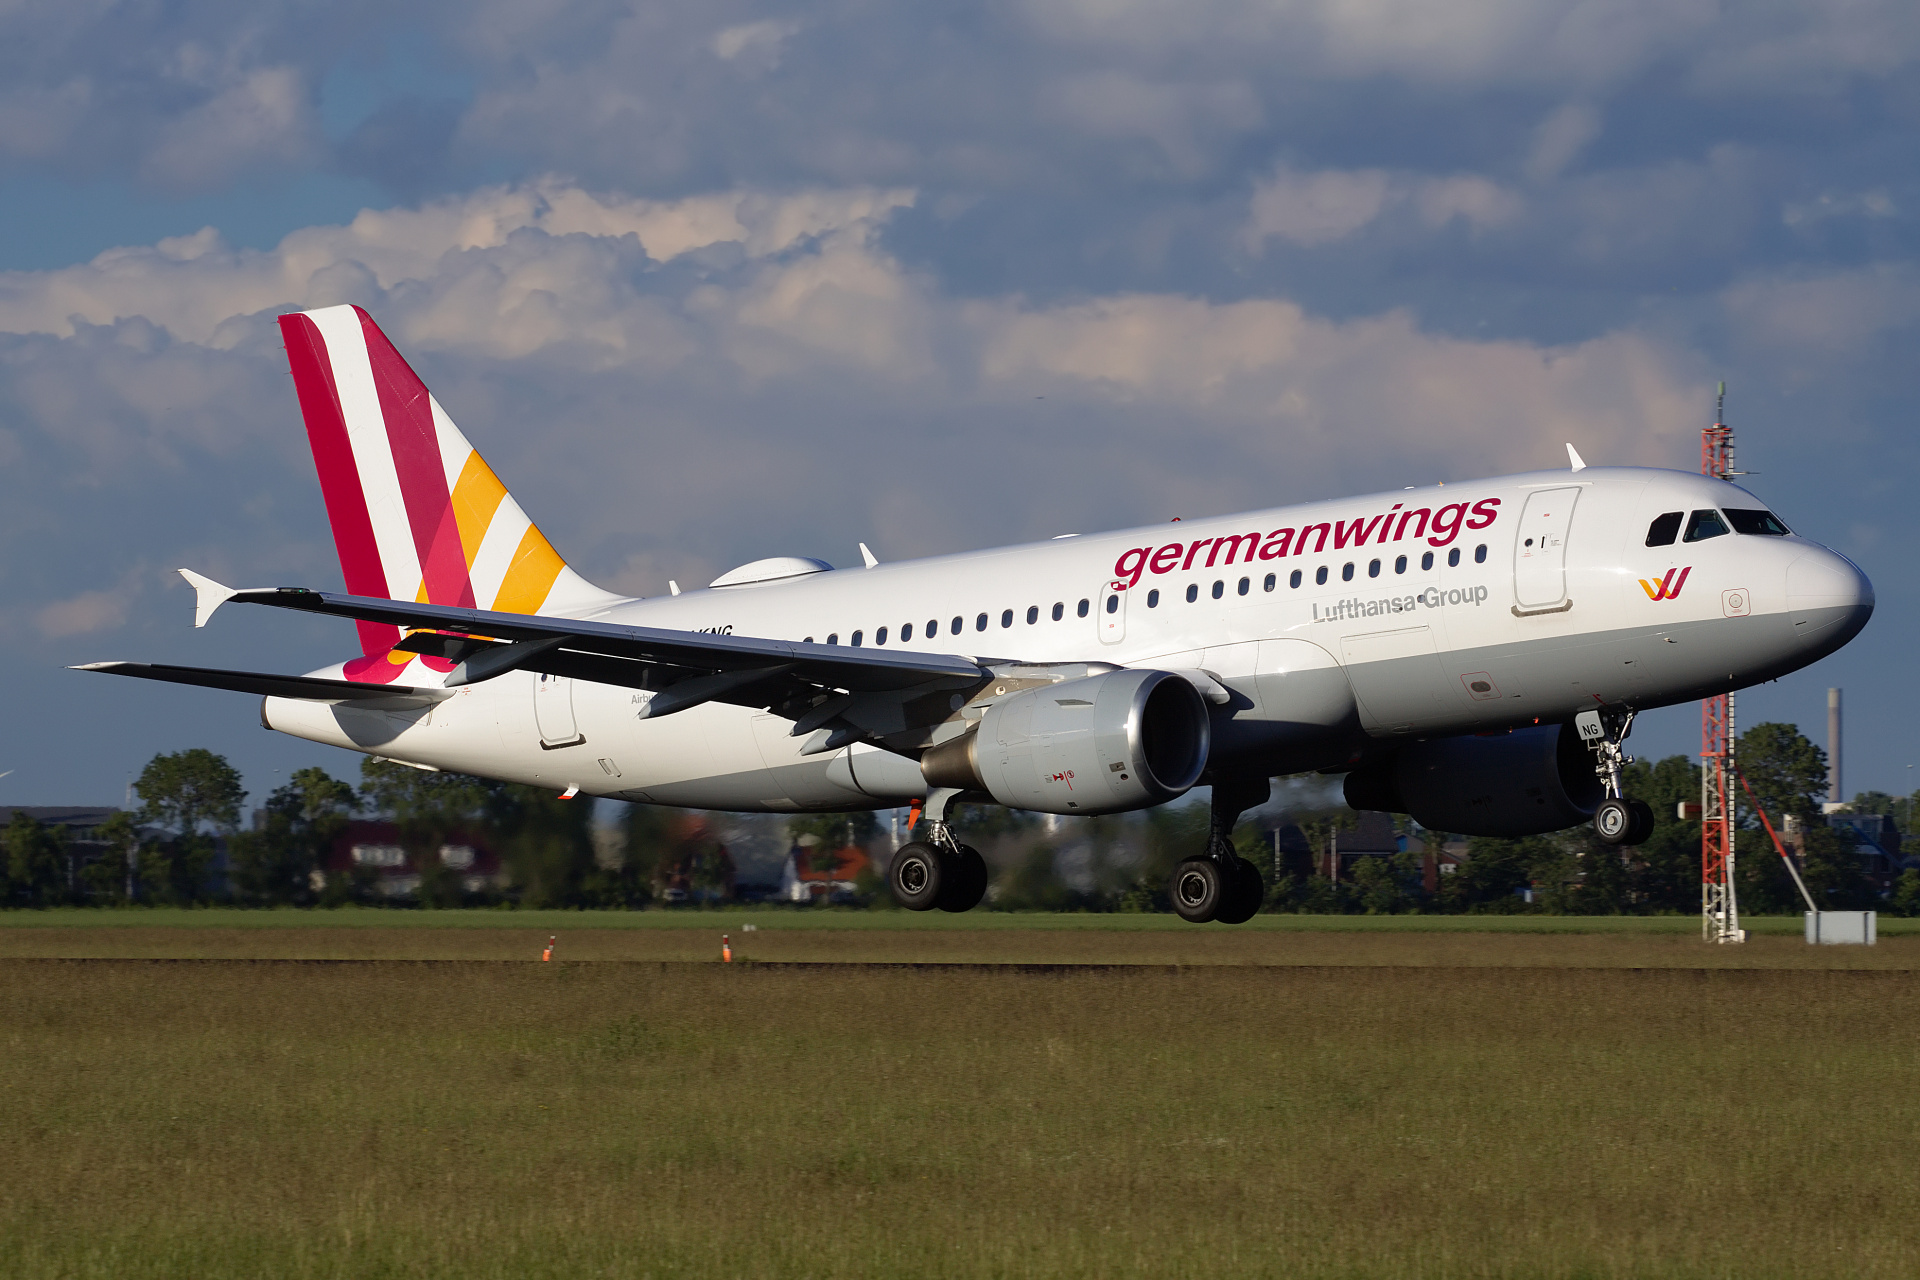 D-AKNG, Germanwings (Eurowings) (Aircraft » Schiphol Spotting » Airbus A319-100)